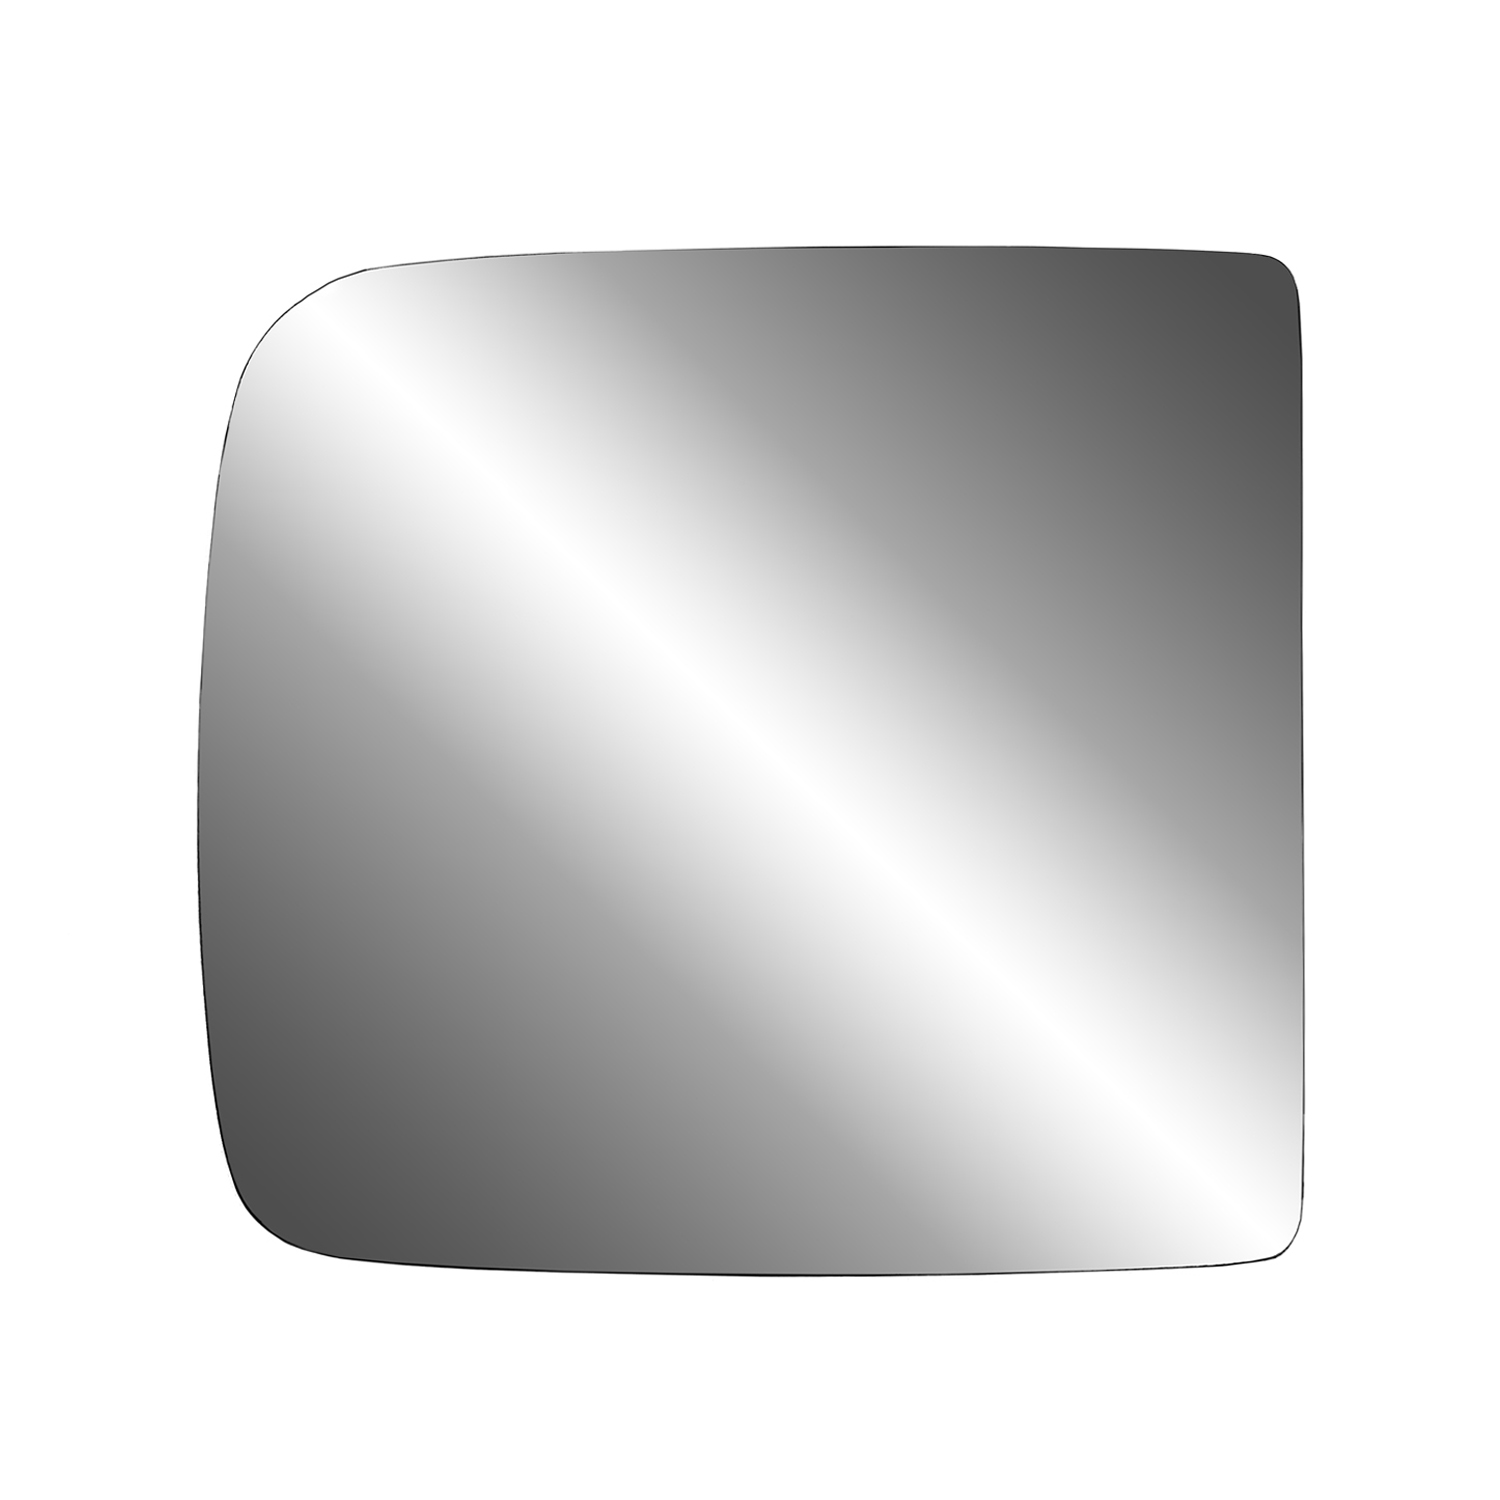 REPLACEMENT GLASS MIRROR